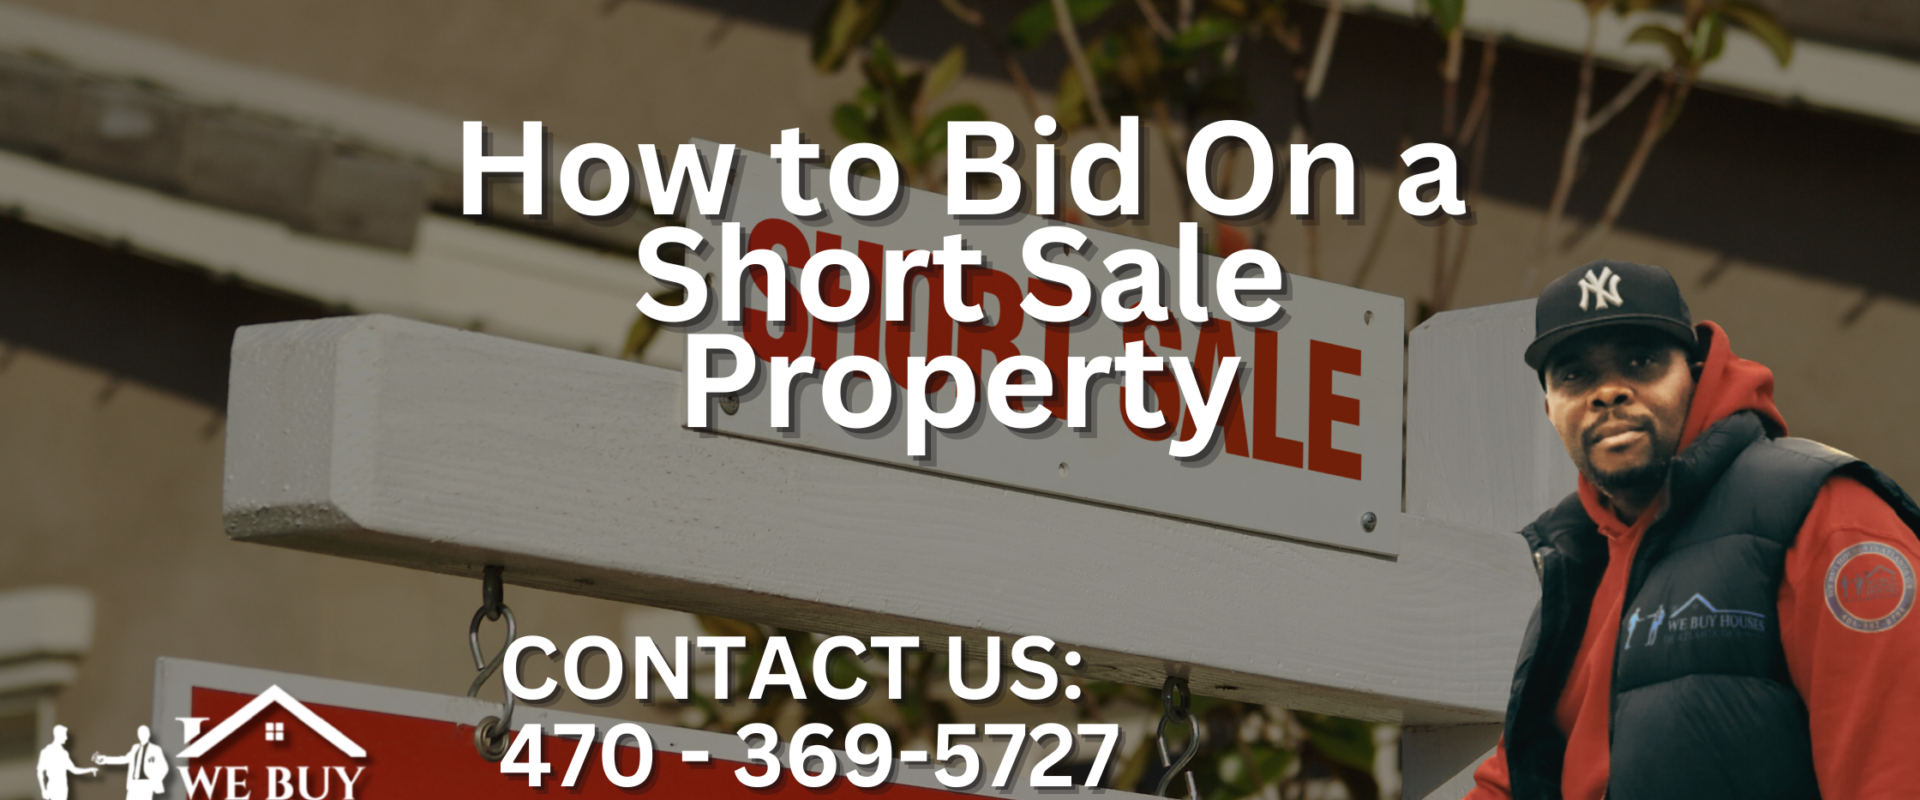 How-to-Bid-On-a-Short-Sale-Property